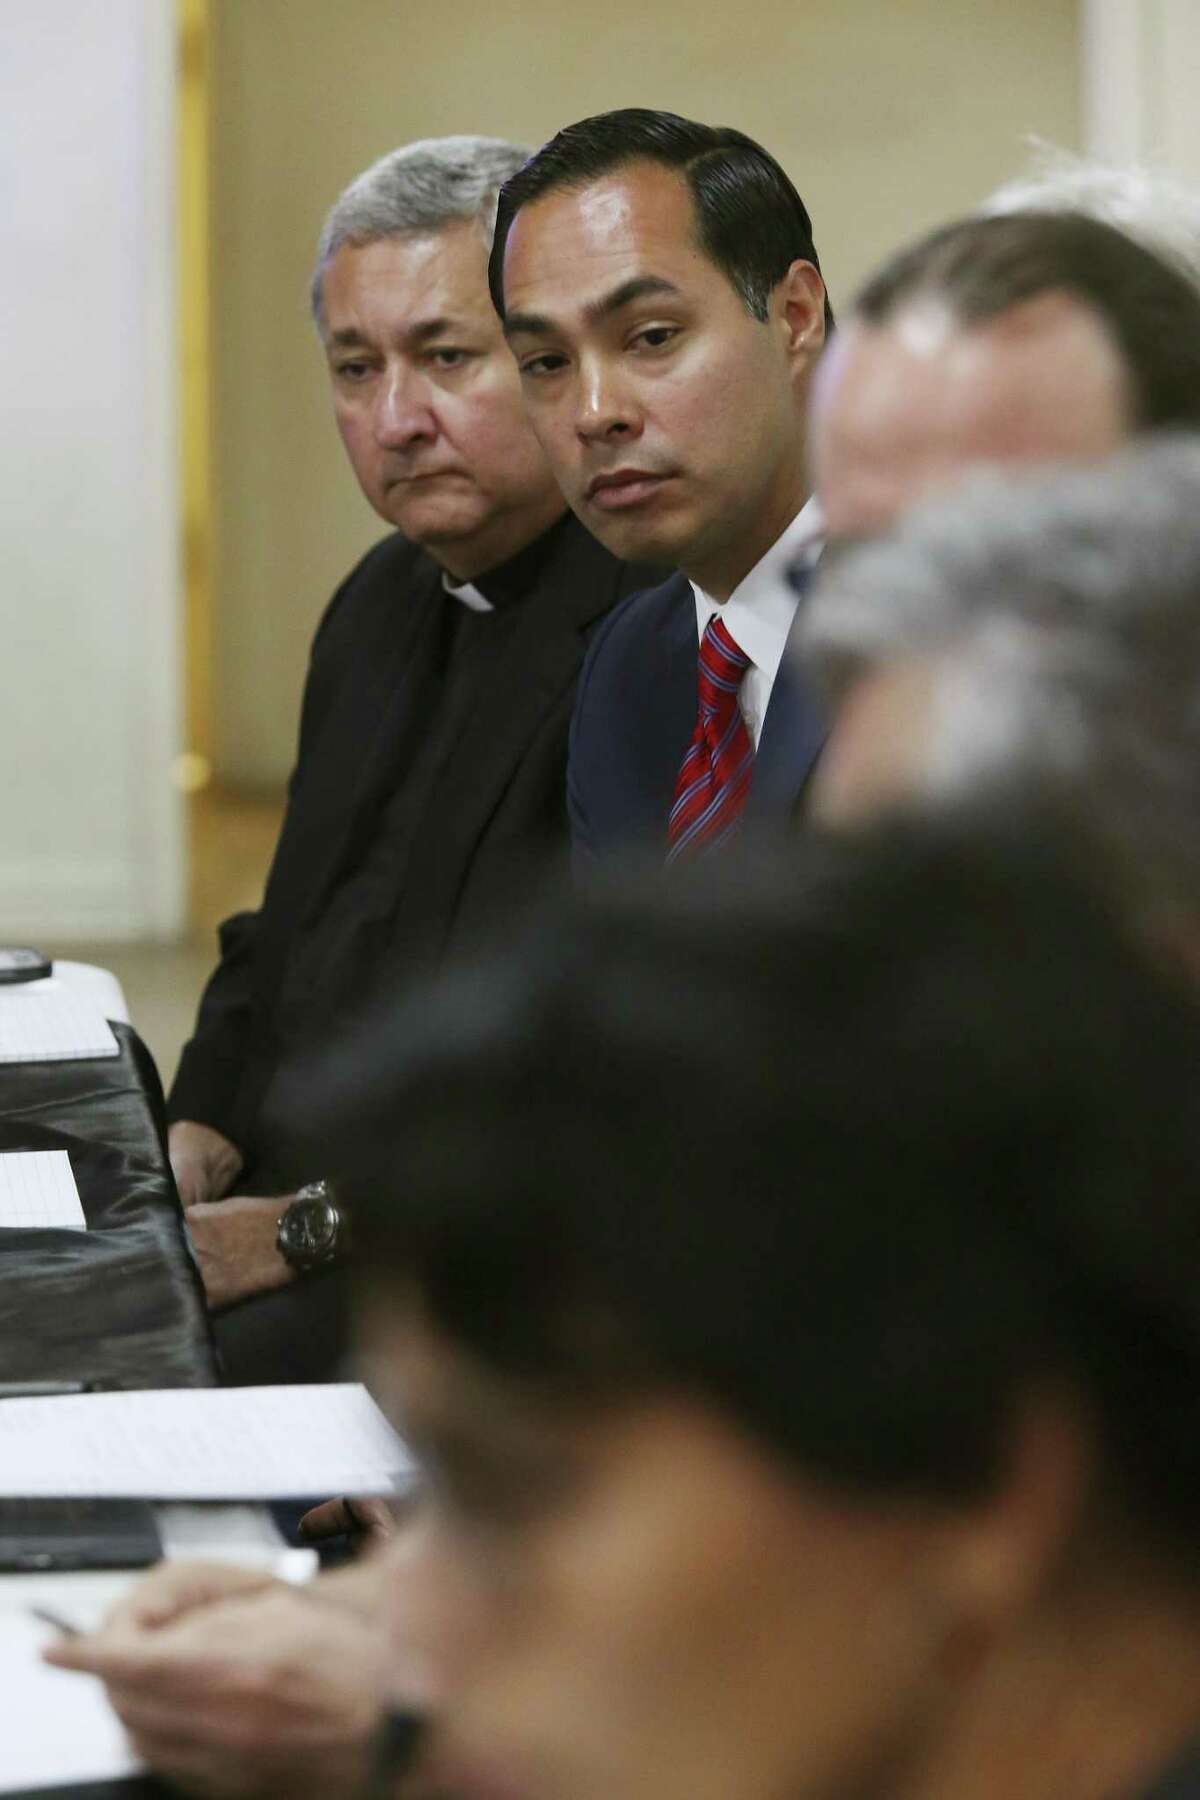 Monsignor Bert Diaz, with St. Mary?’s Catholic Church and former Secretary of Housing and Urban Development Julian Castro participate in an immigration press briefing in Brownsville, Texas, Monday, June 18, 2018. Earlier in the day, six Democratic congress members visited two immigration shelters holding minor migrants. Some of them are the results of the President Donald Trump?’s ?“Zero-tolerance?” family separation policy.